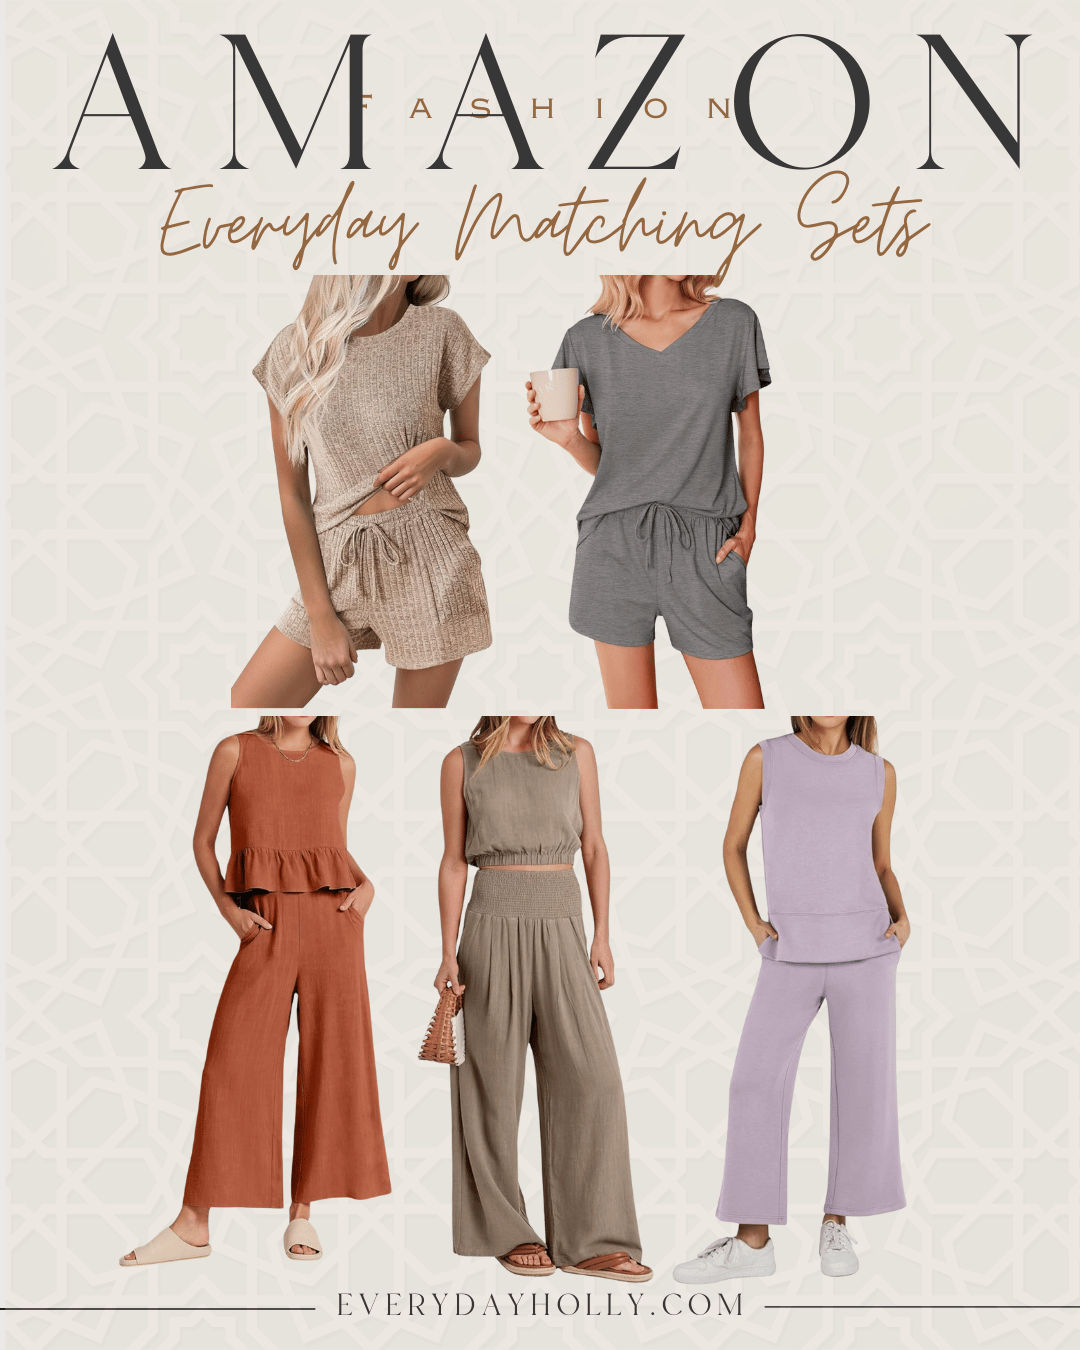 summer wardrobe essentials affordable everyday and casual outfit ideas | summer, summer outfit, everyday outfit, casual outfit, amazon, loungewear, lounge set, matching set, linen set, wide leg set, travel outfit